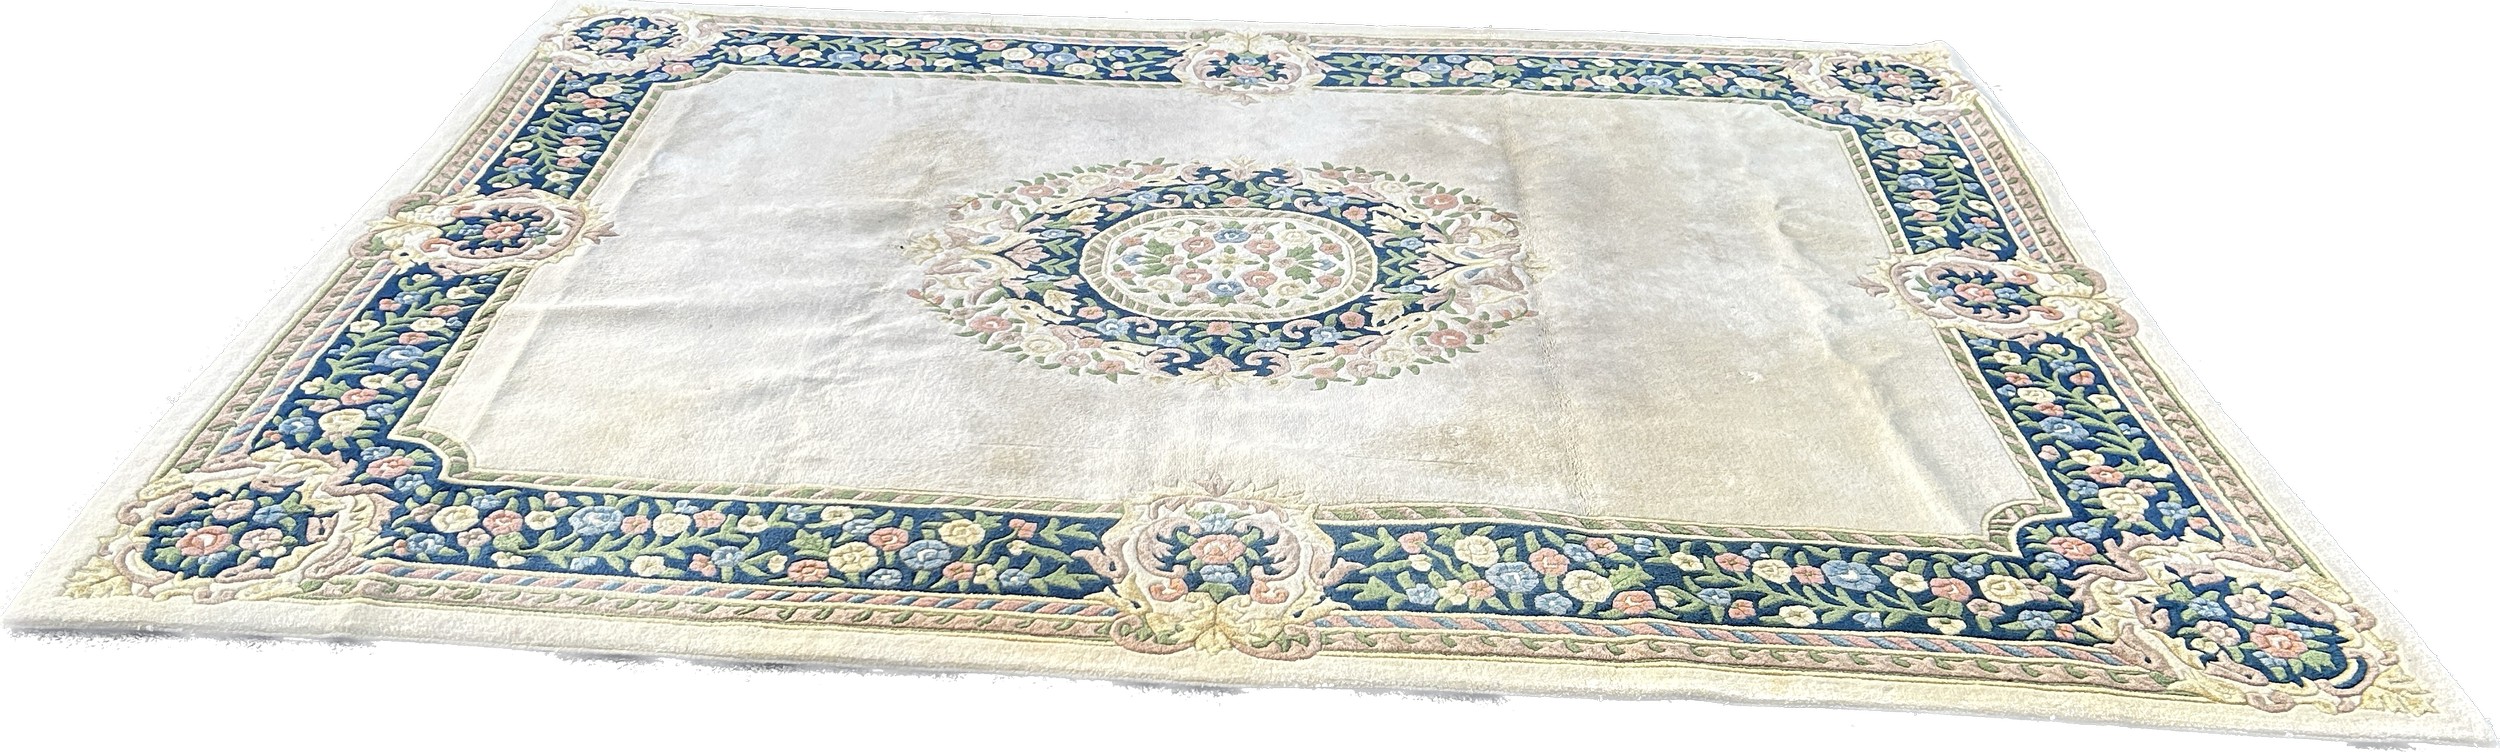 Large cream coloured patterned lounge rug, approximate measurements: 143 x 107 inches